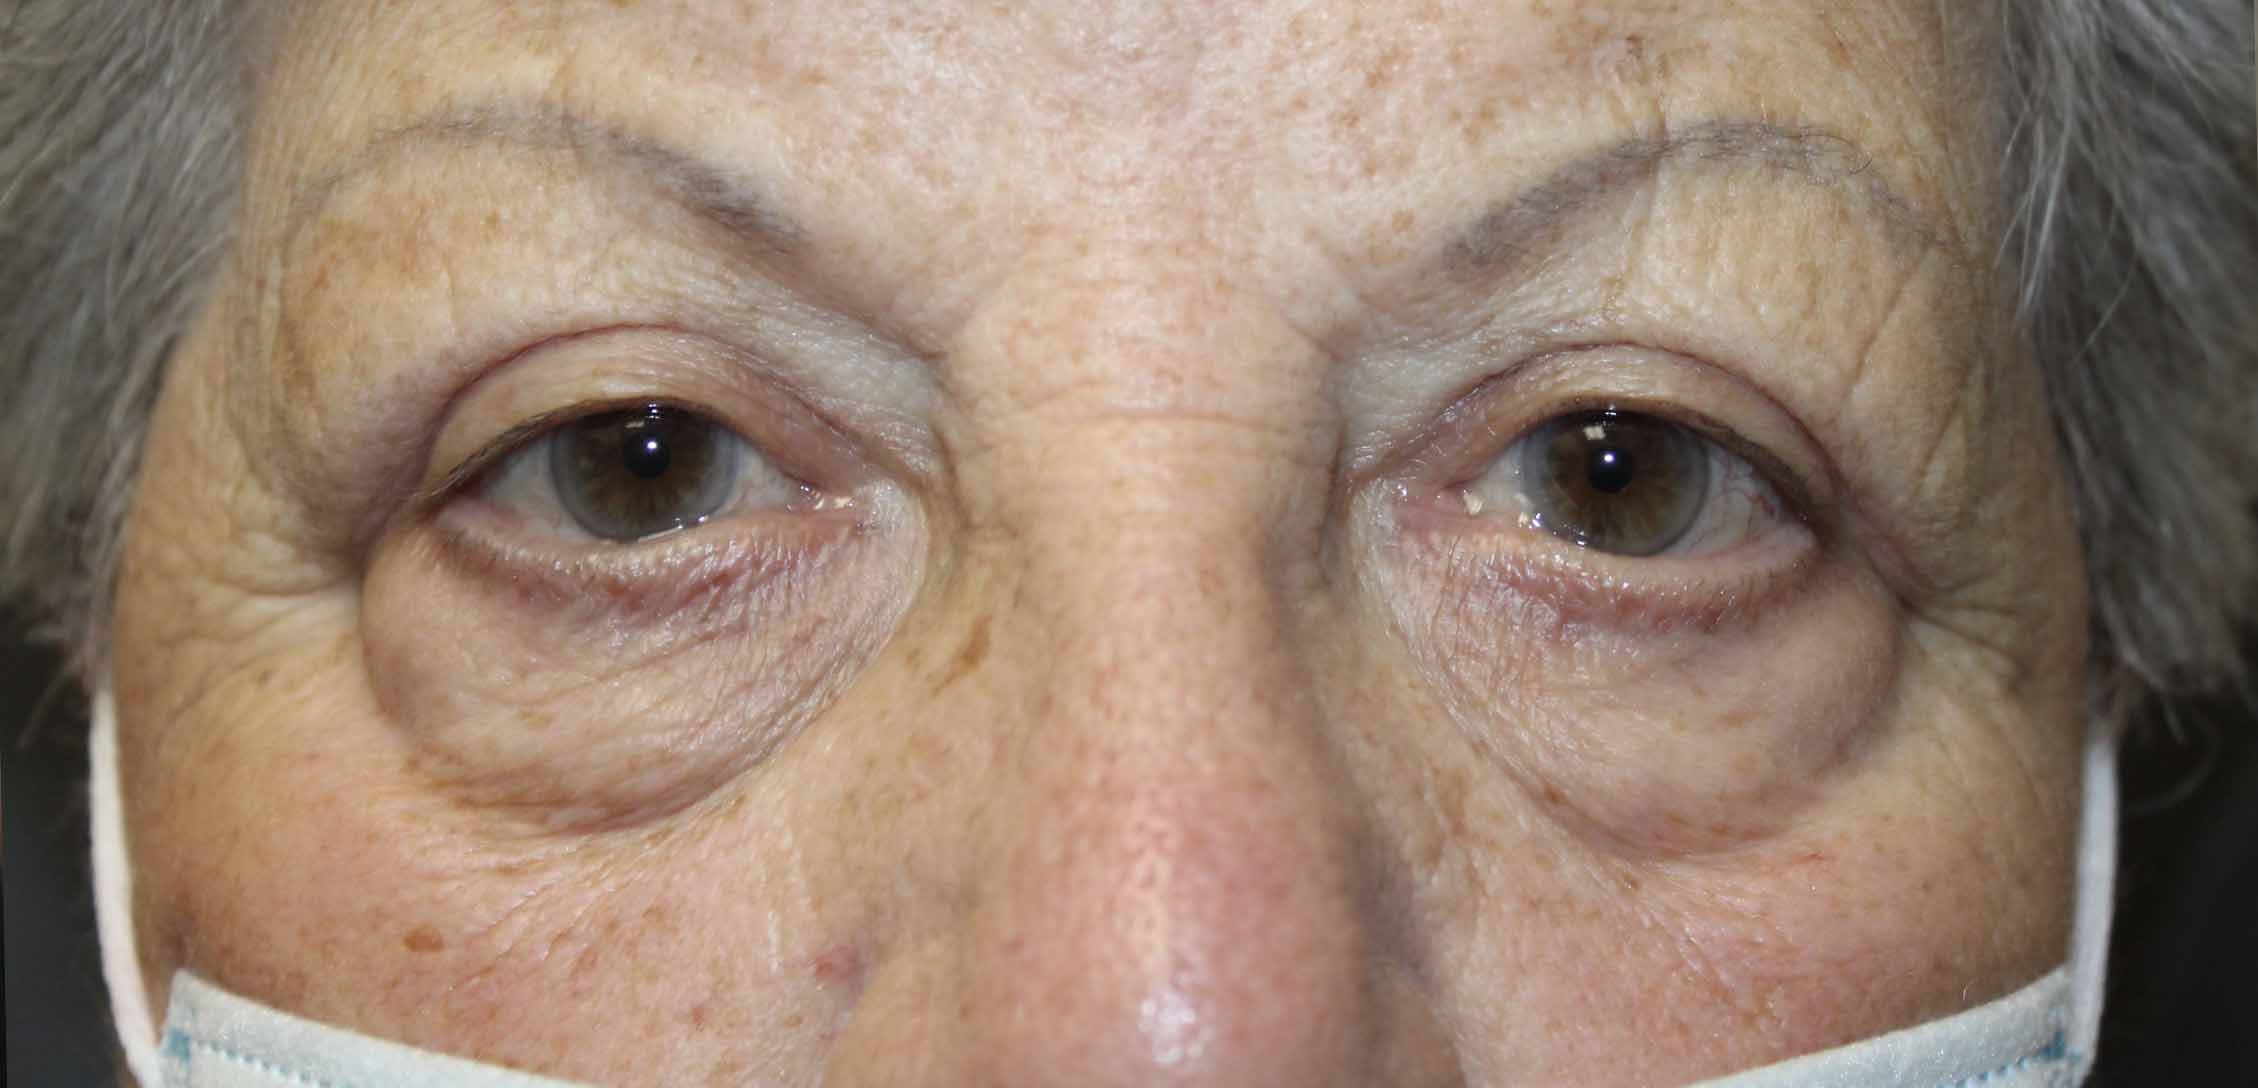 70 year old woman 2 months after blepharoplasty procedure